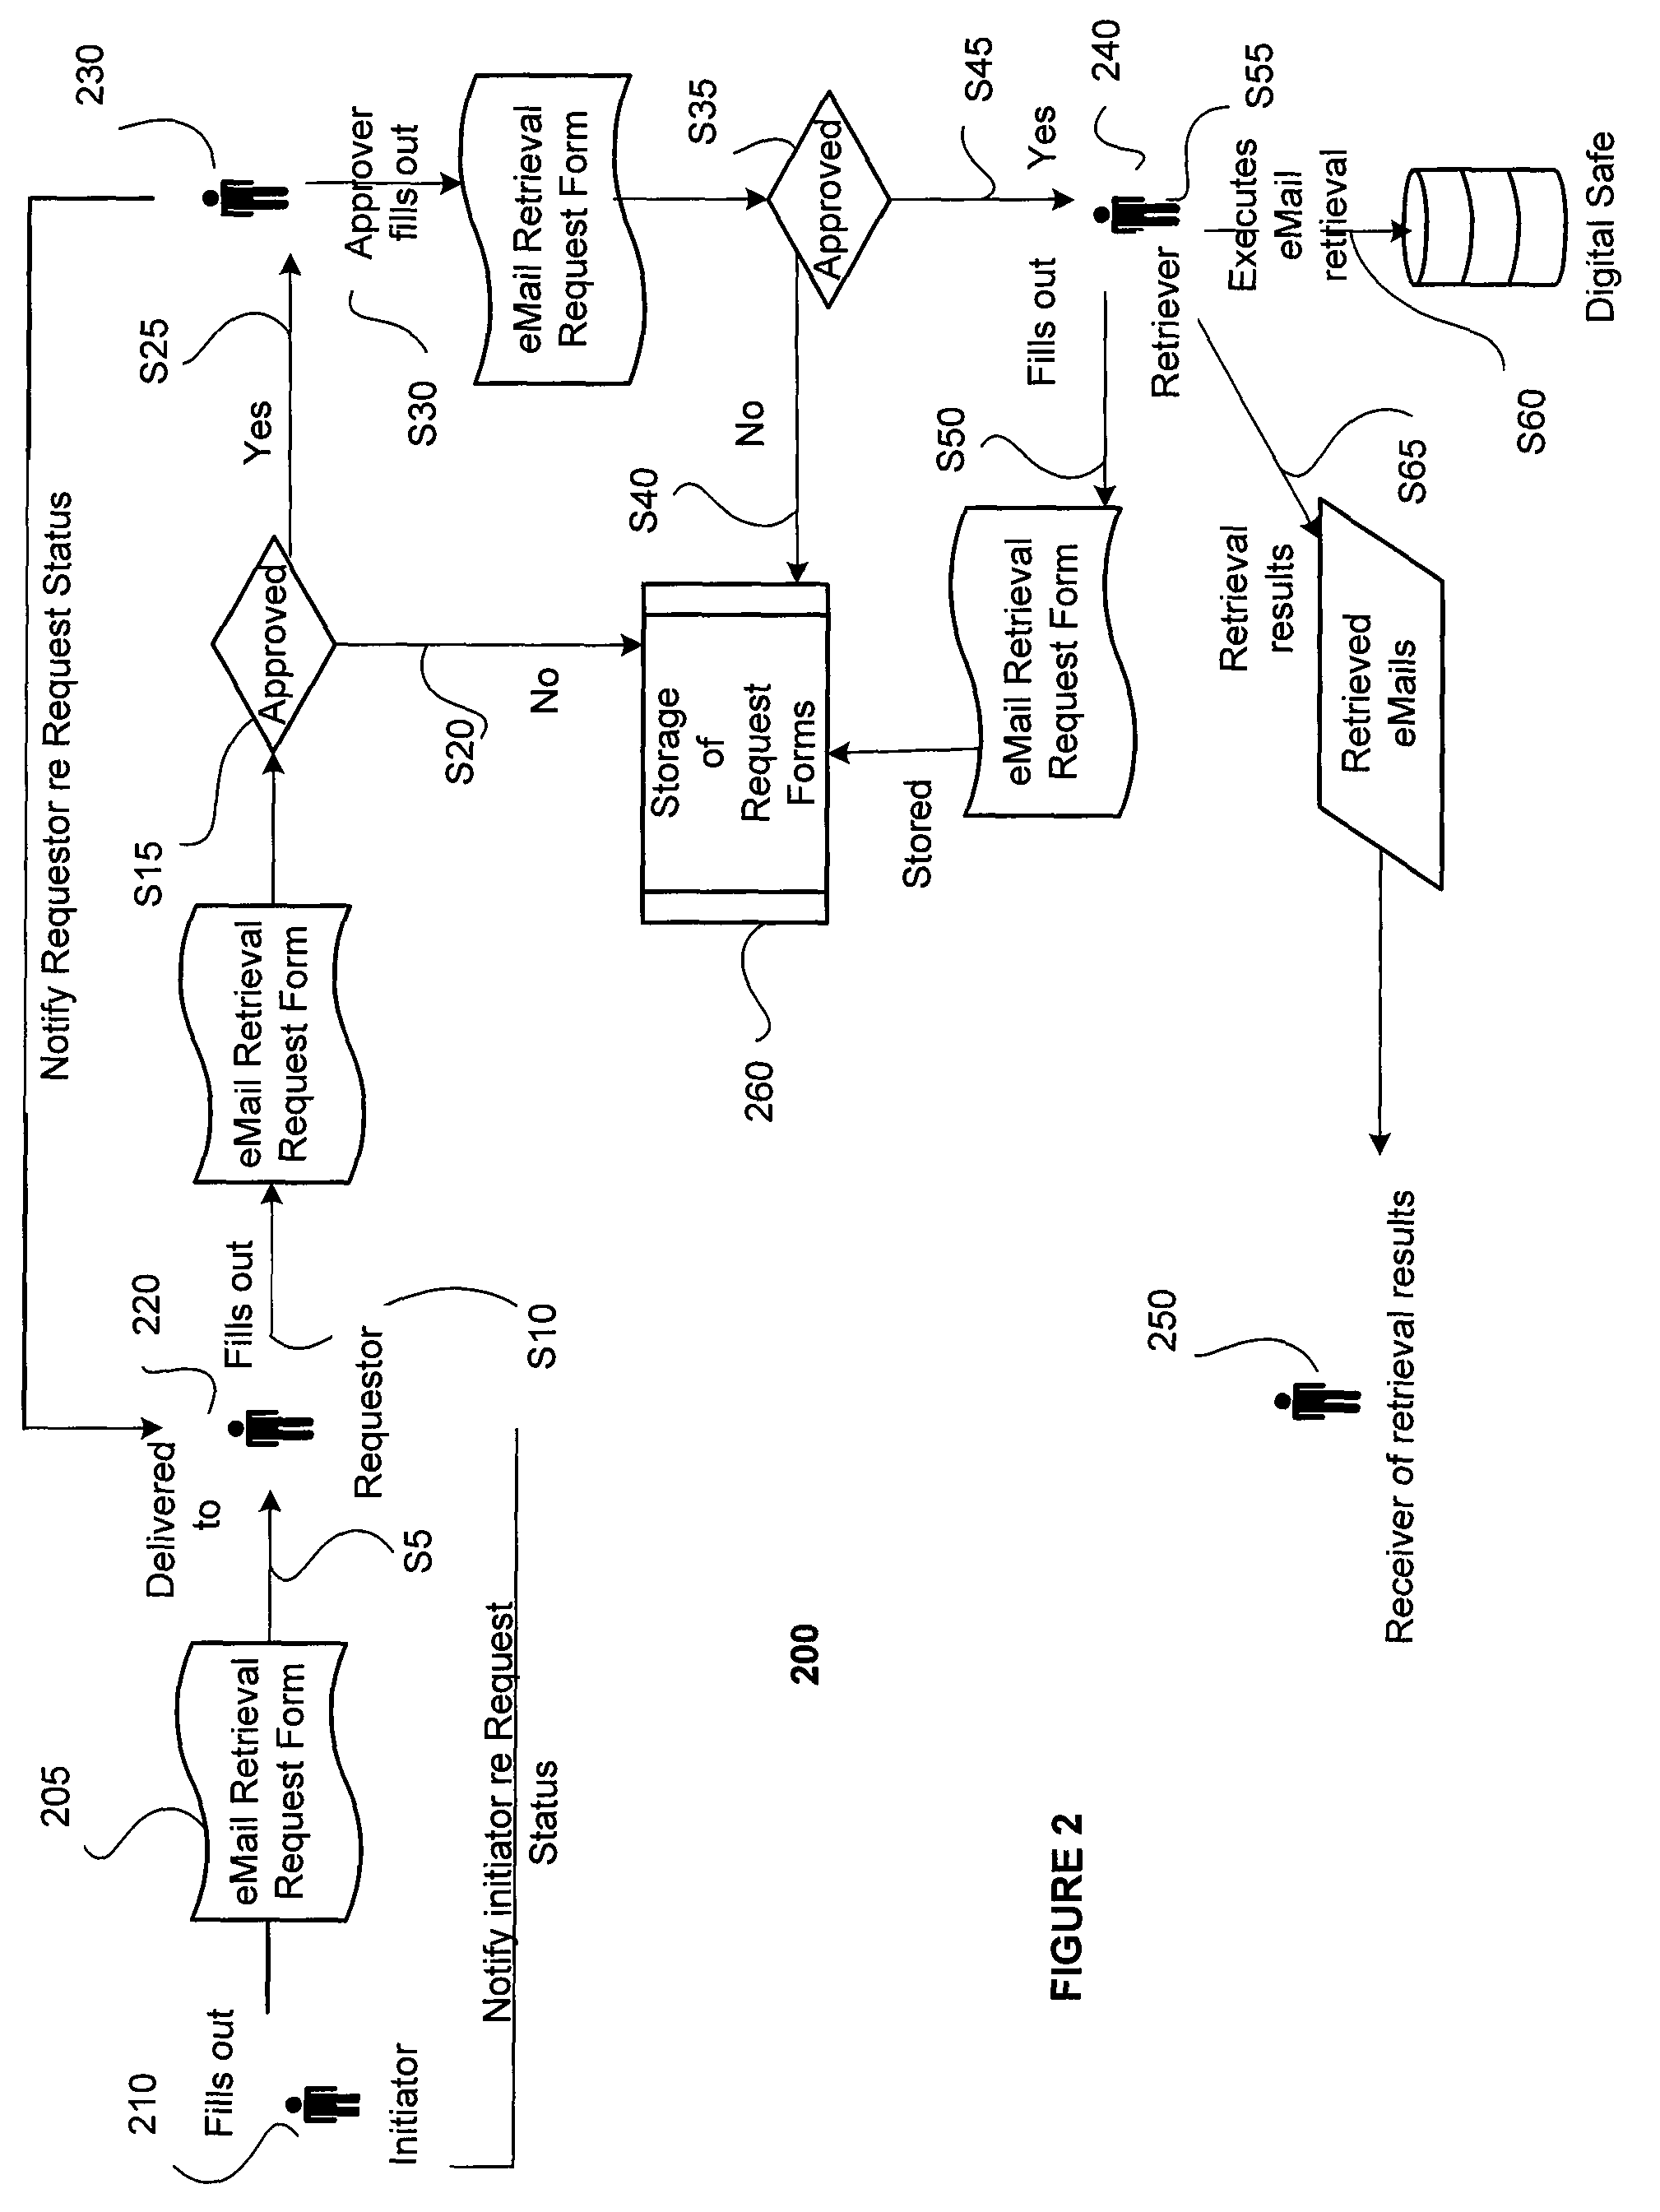 Method and system for electronic archival and retrieval of electronic communications